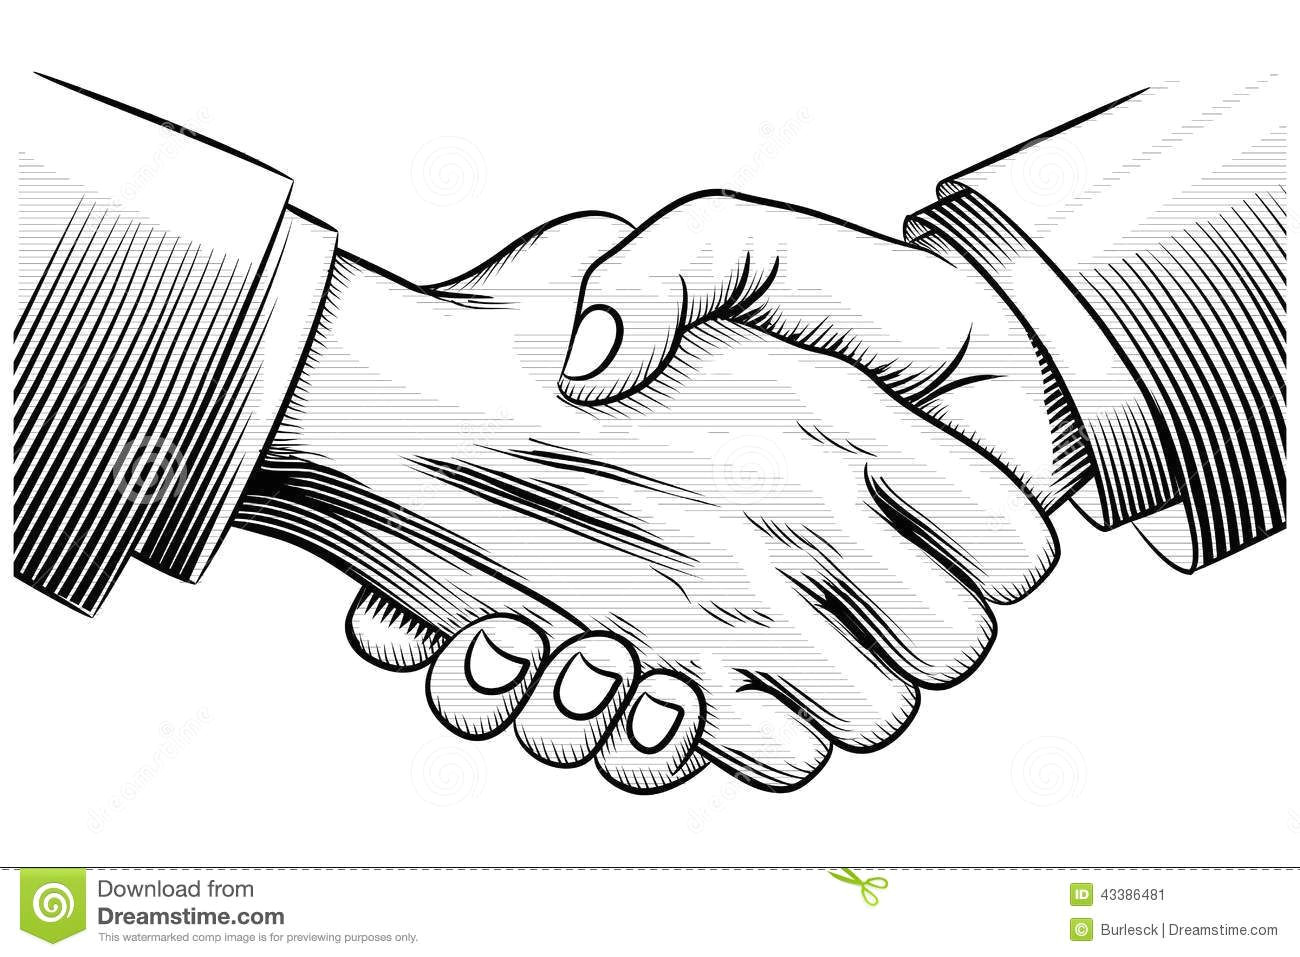 Drawings Of A Handshake Sketch Handshake Download From Over 35 Million High Quality Stock